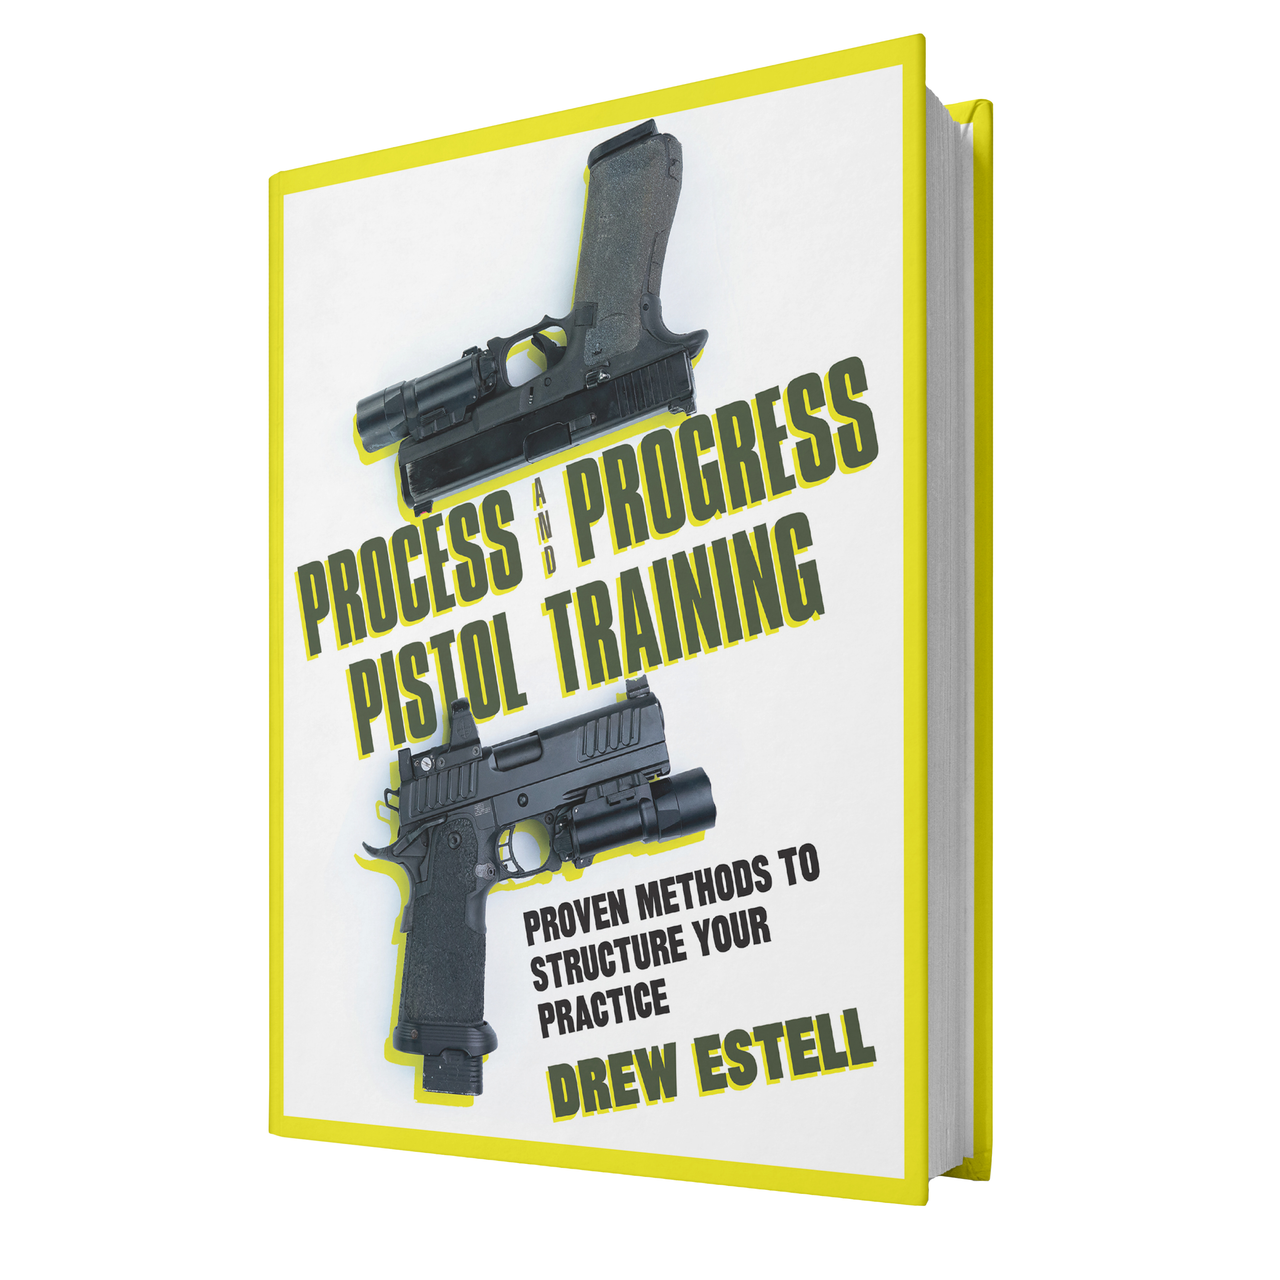 Process and Progress Pistol Training Book by Drew Estell of Baer Solutions